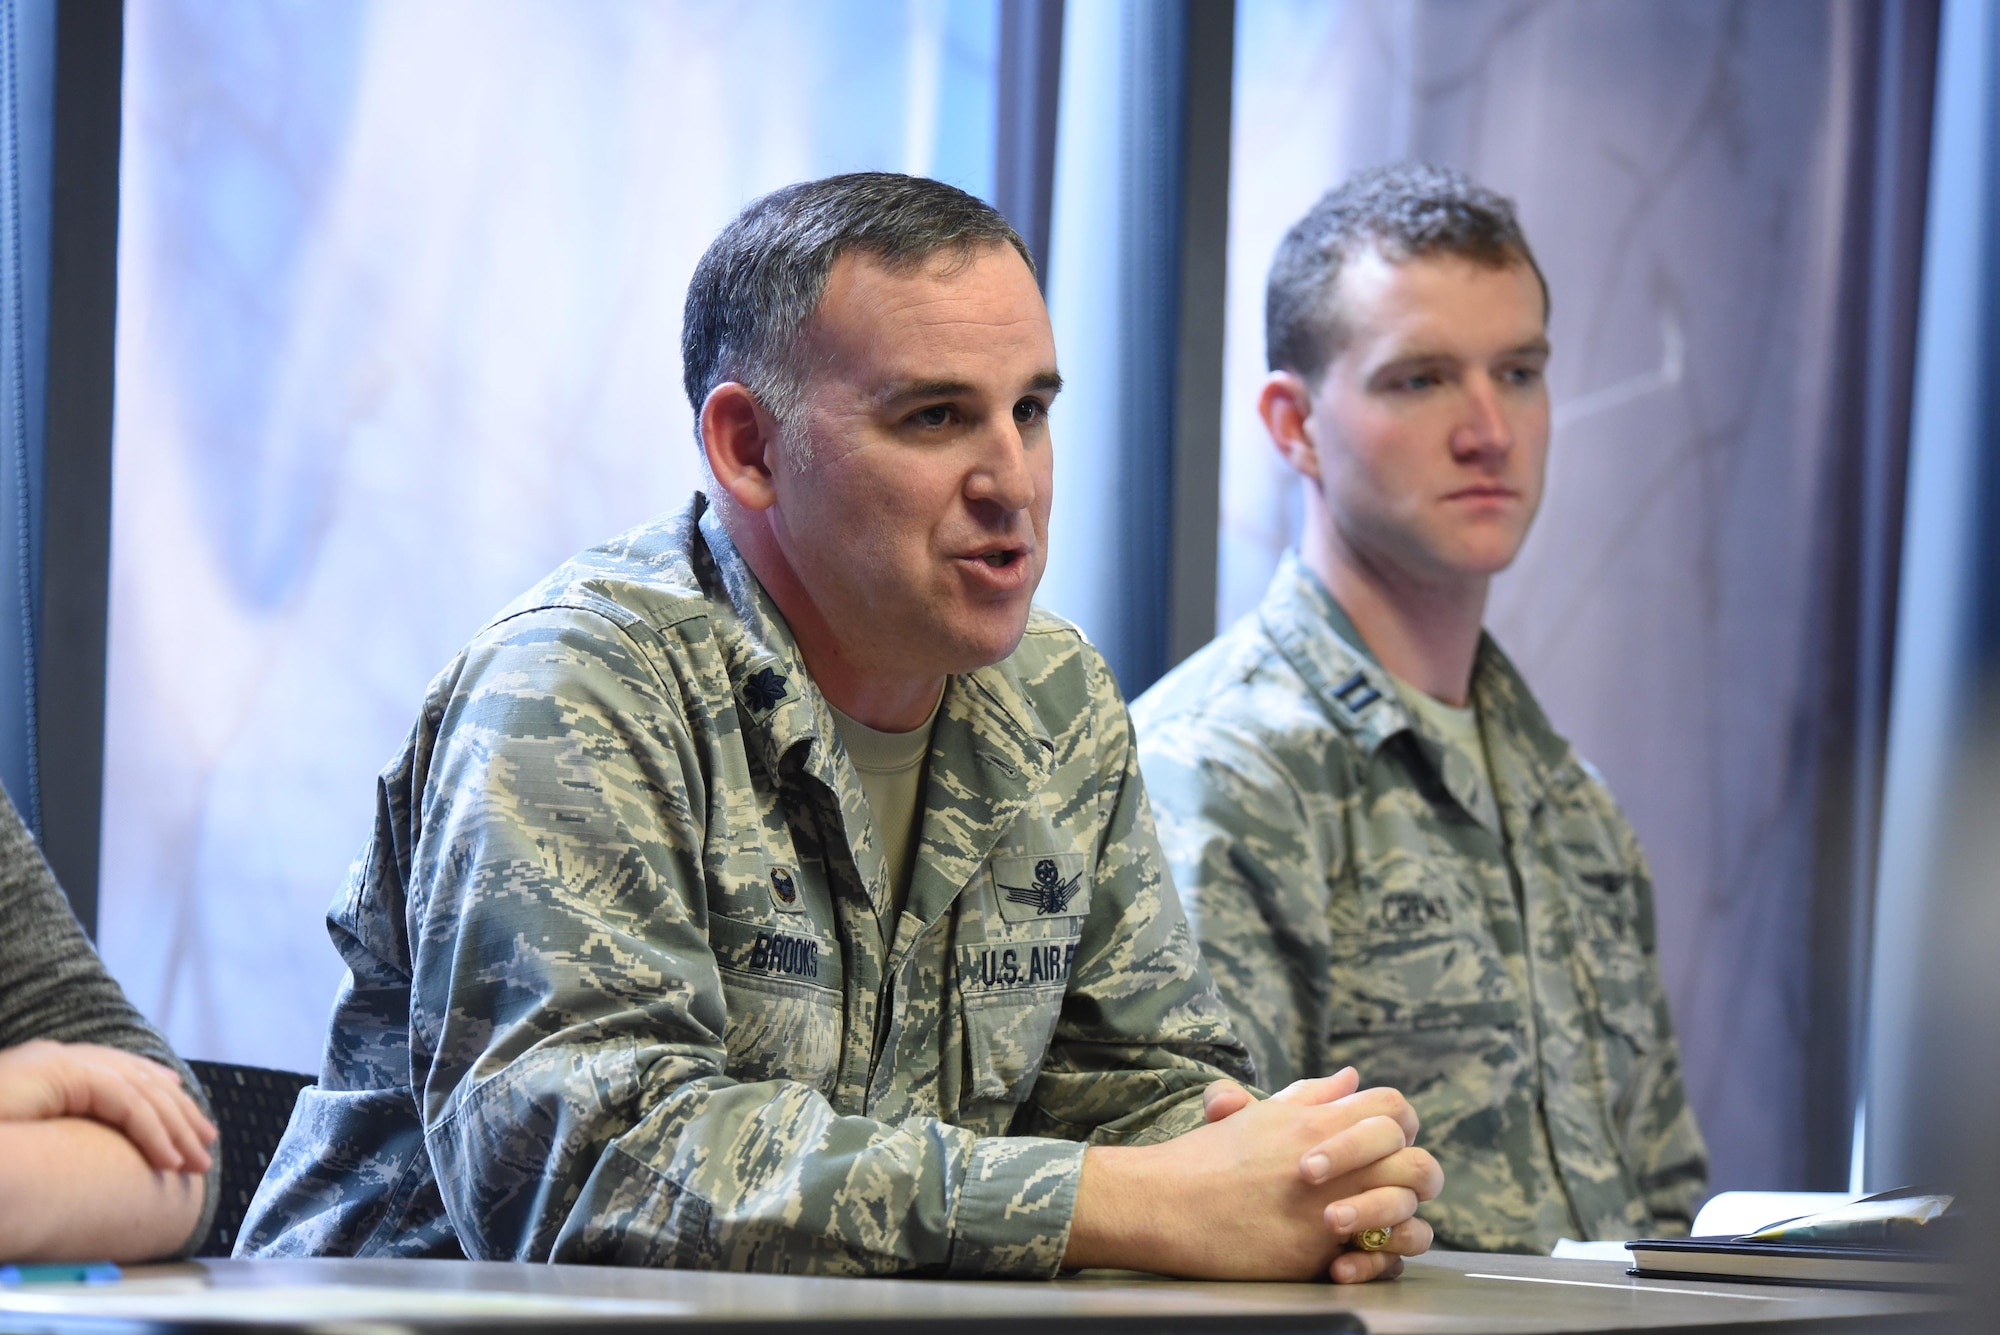 Lt. Col. Joshua Brooks, 3rd Space Operations Squadron commander, speaks to attendees during the “Shocking truth of seeking help: I went to mental health” class for Wingman Day at Schriever Air Force Base, Colorado, Thursday, May 4, 2017. Brooks shared his personal experiences going to see mental health, and voiced his support for all Schriever Airmen to do the same if they feel it will help them in their lives. (U.S. Air Force photo/Airman 1st Class William Tracy)